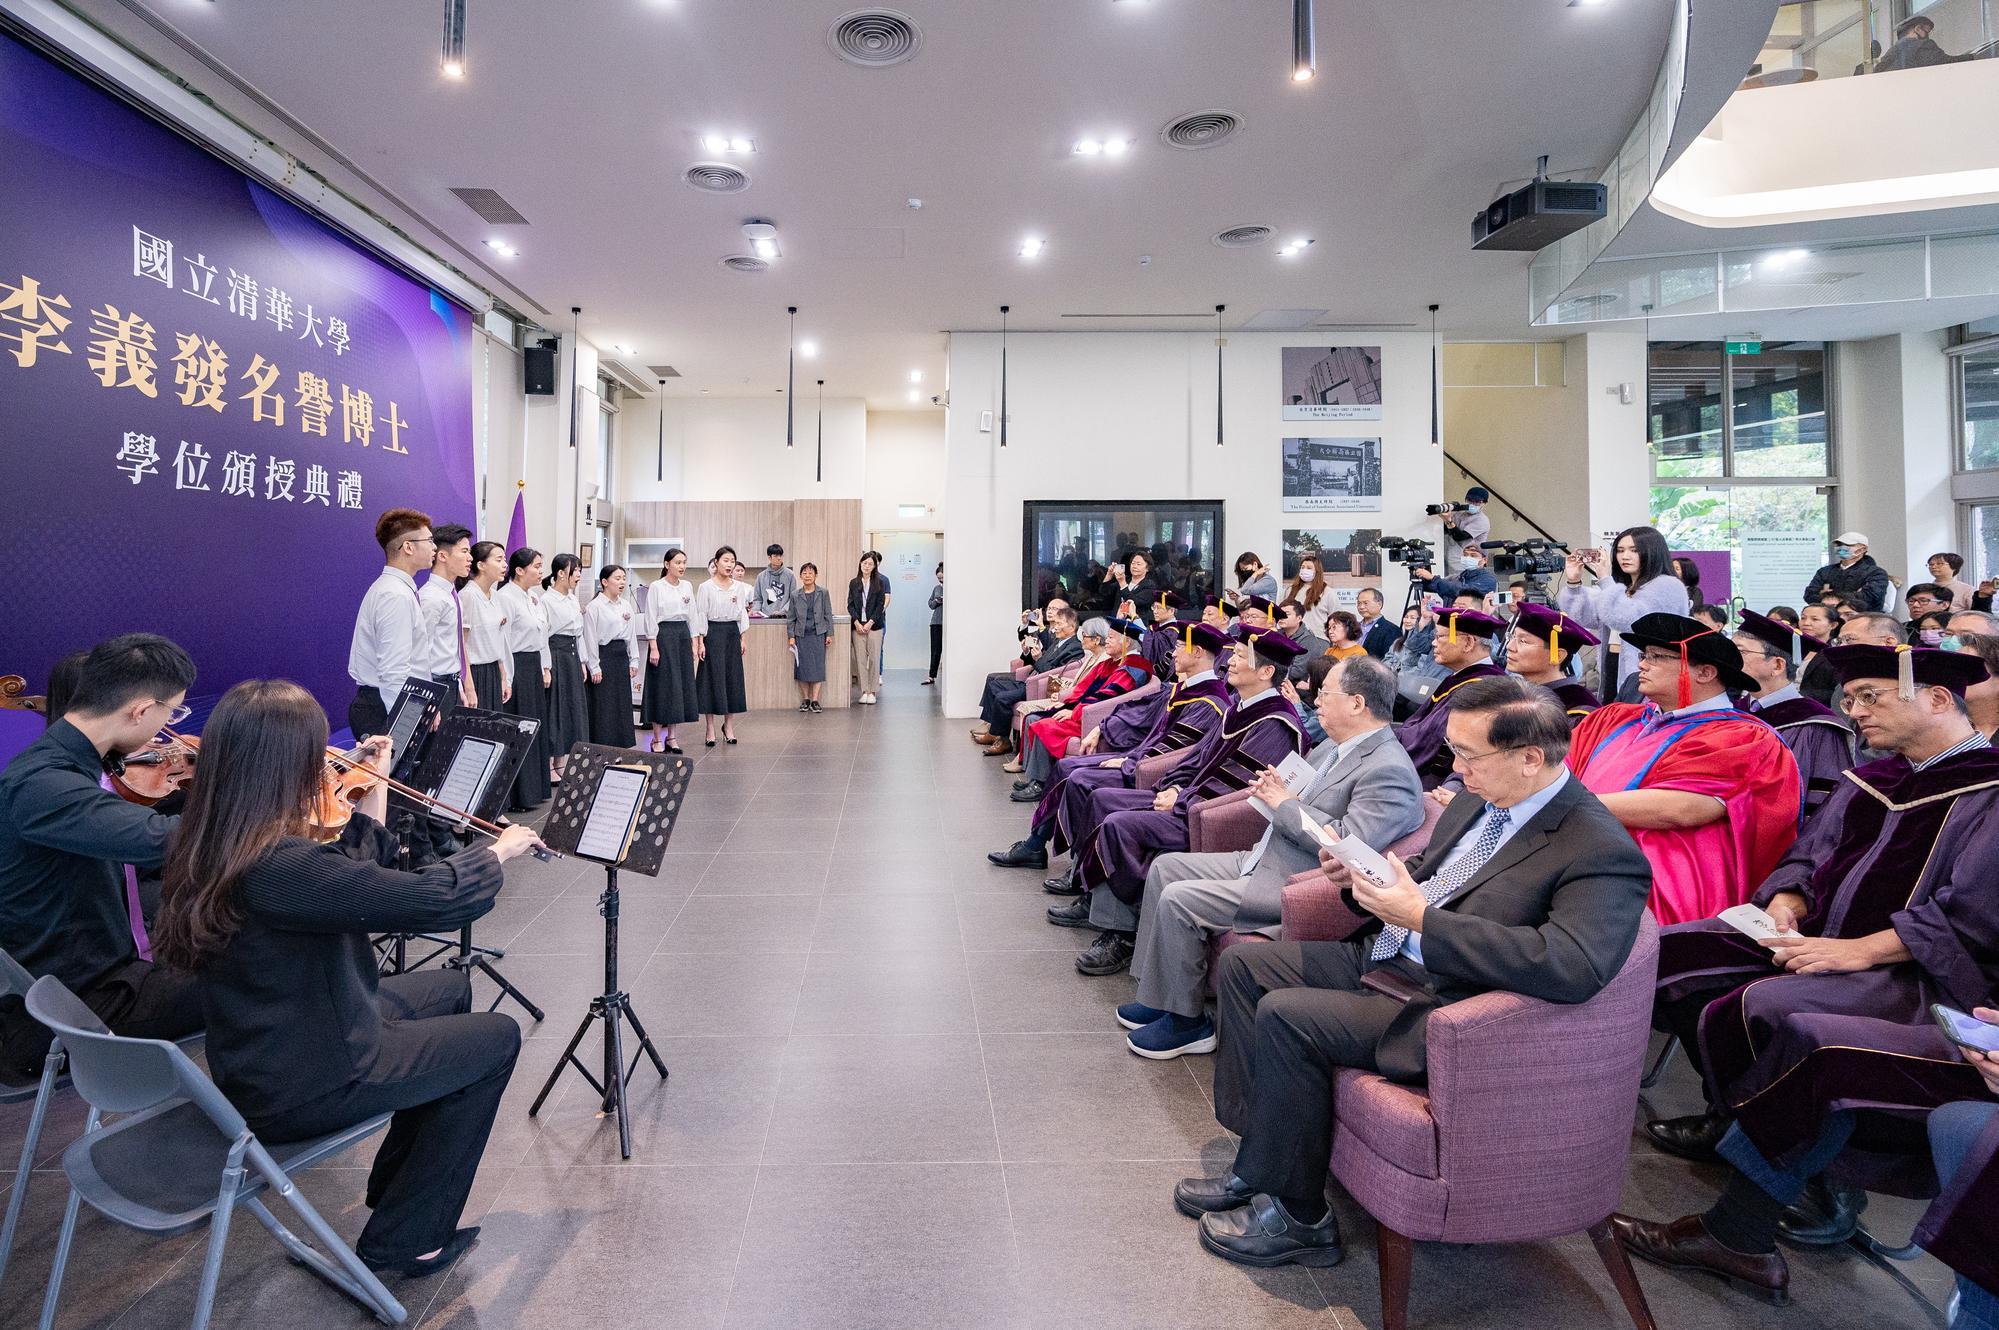 NTHU conferred an honorary doctorate upon Dr. Yi-Fa Lee (李義發) on November 14. Nearly a hundred distinguished guests attended, listening to a performance by the students from NTHU's Department of Music